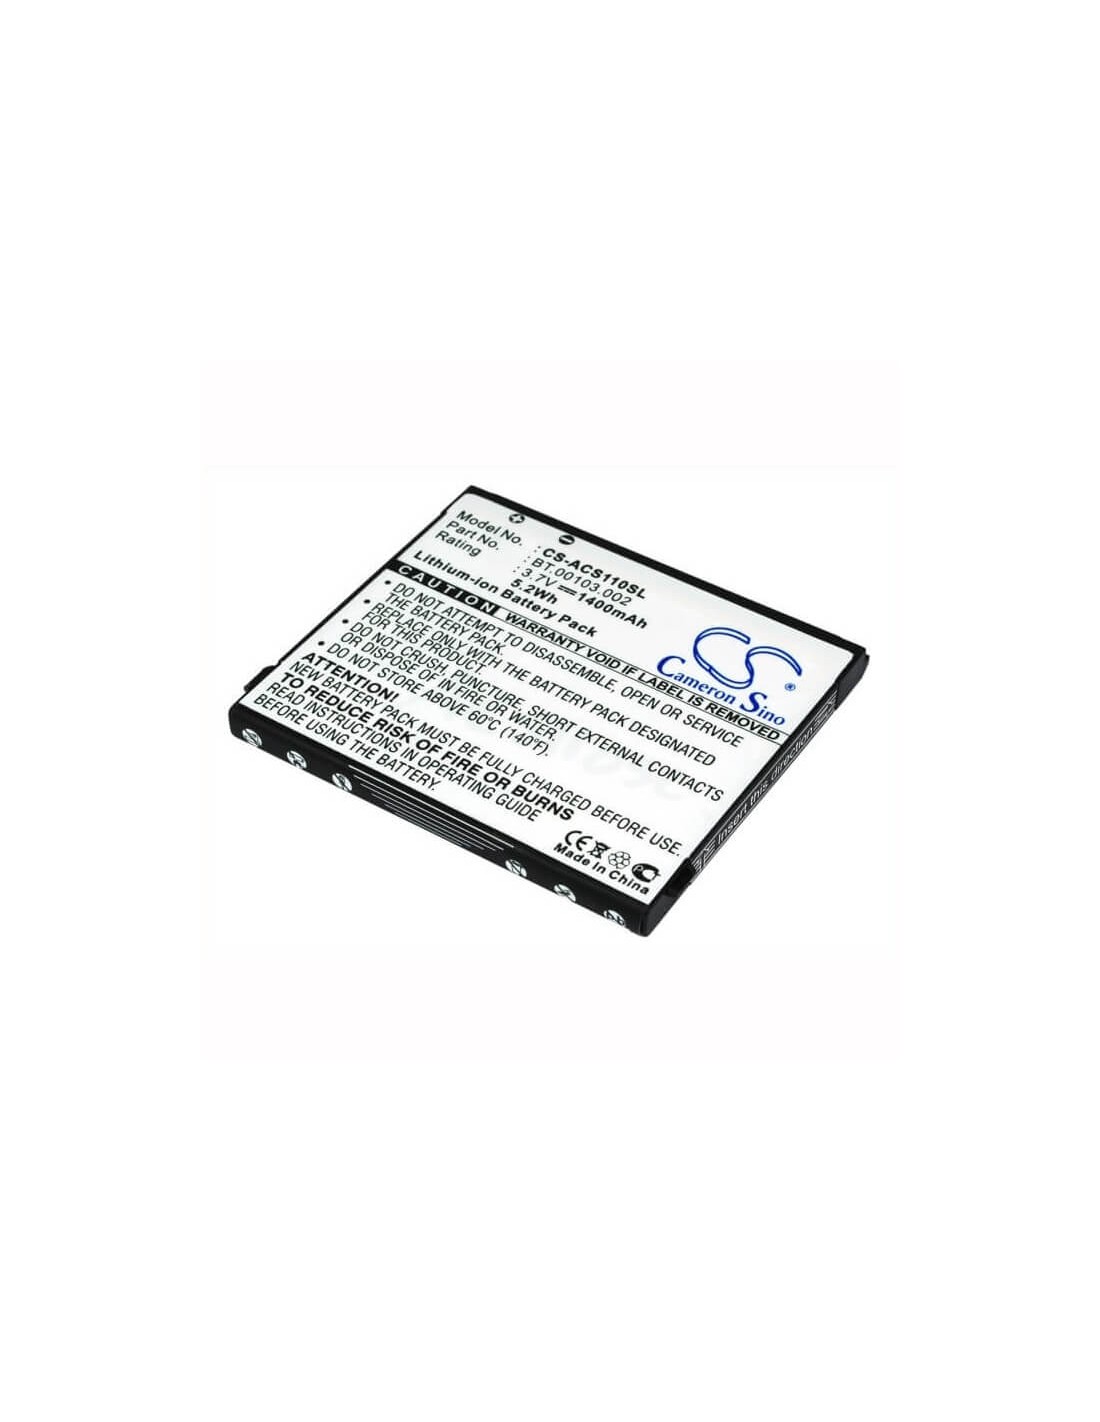 Battery for Acer Liquid S110, Stream, NeoTouch S110 3.7V, 1400mAh - 5.18Wh